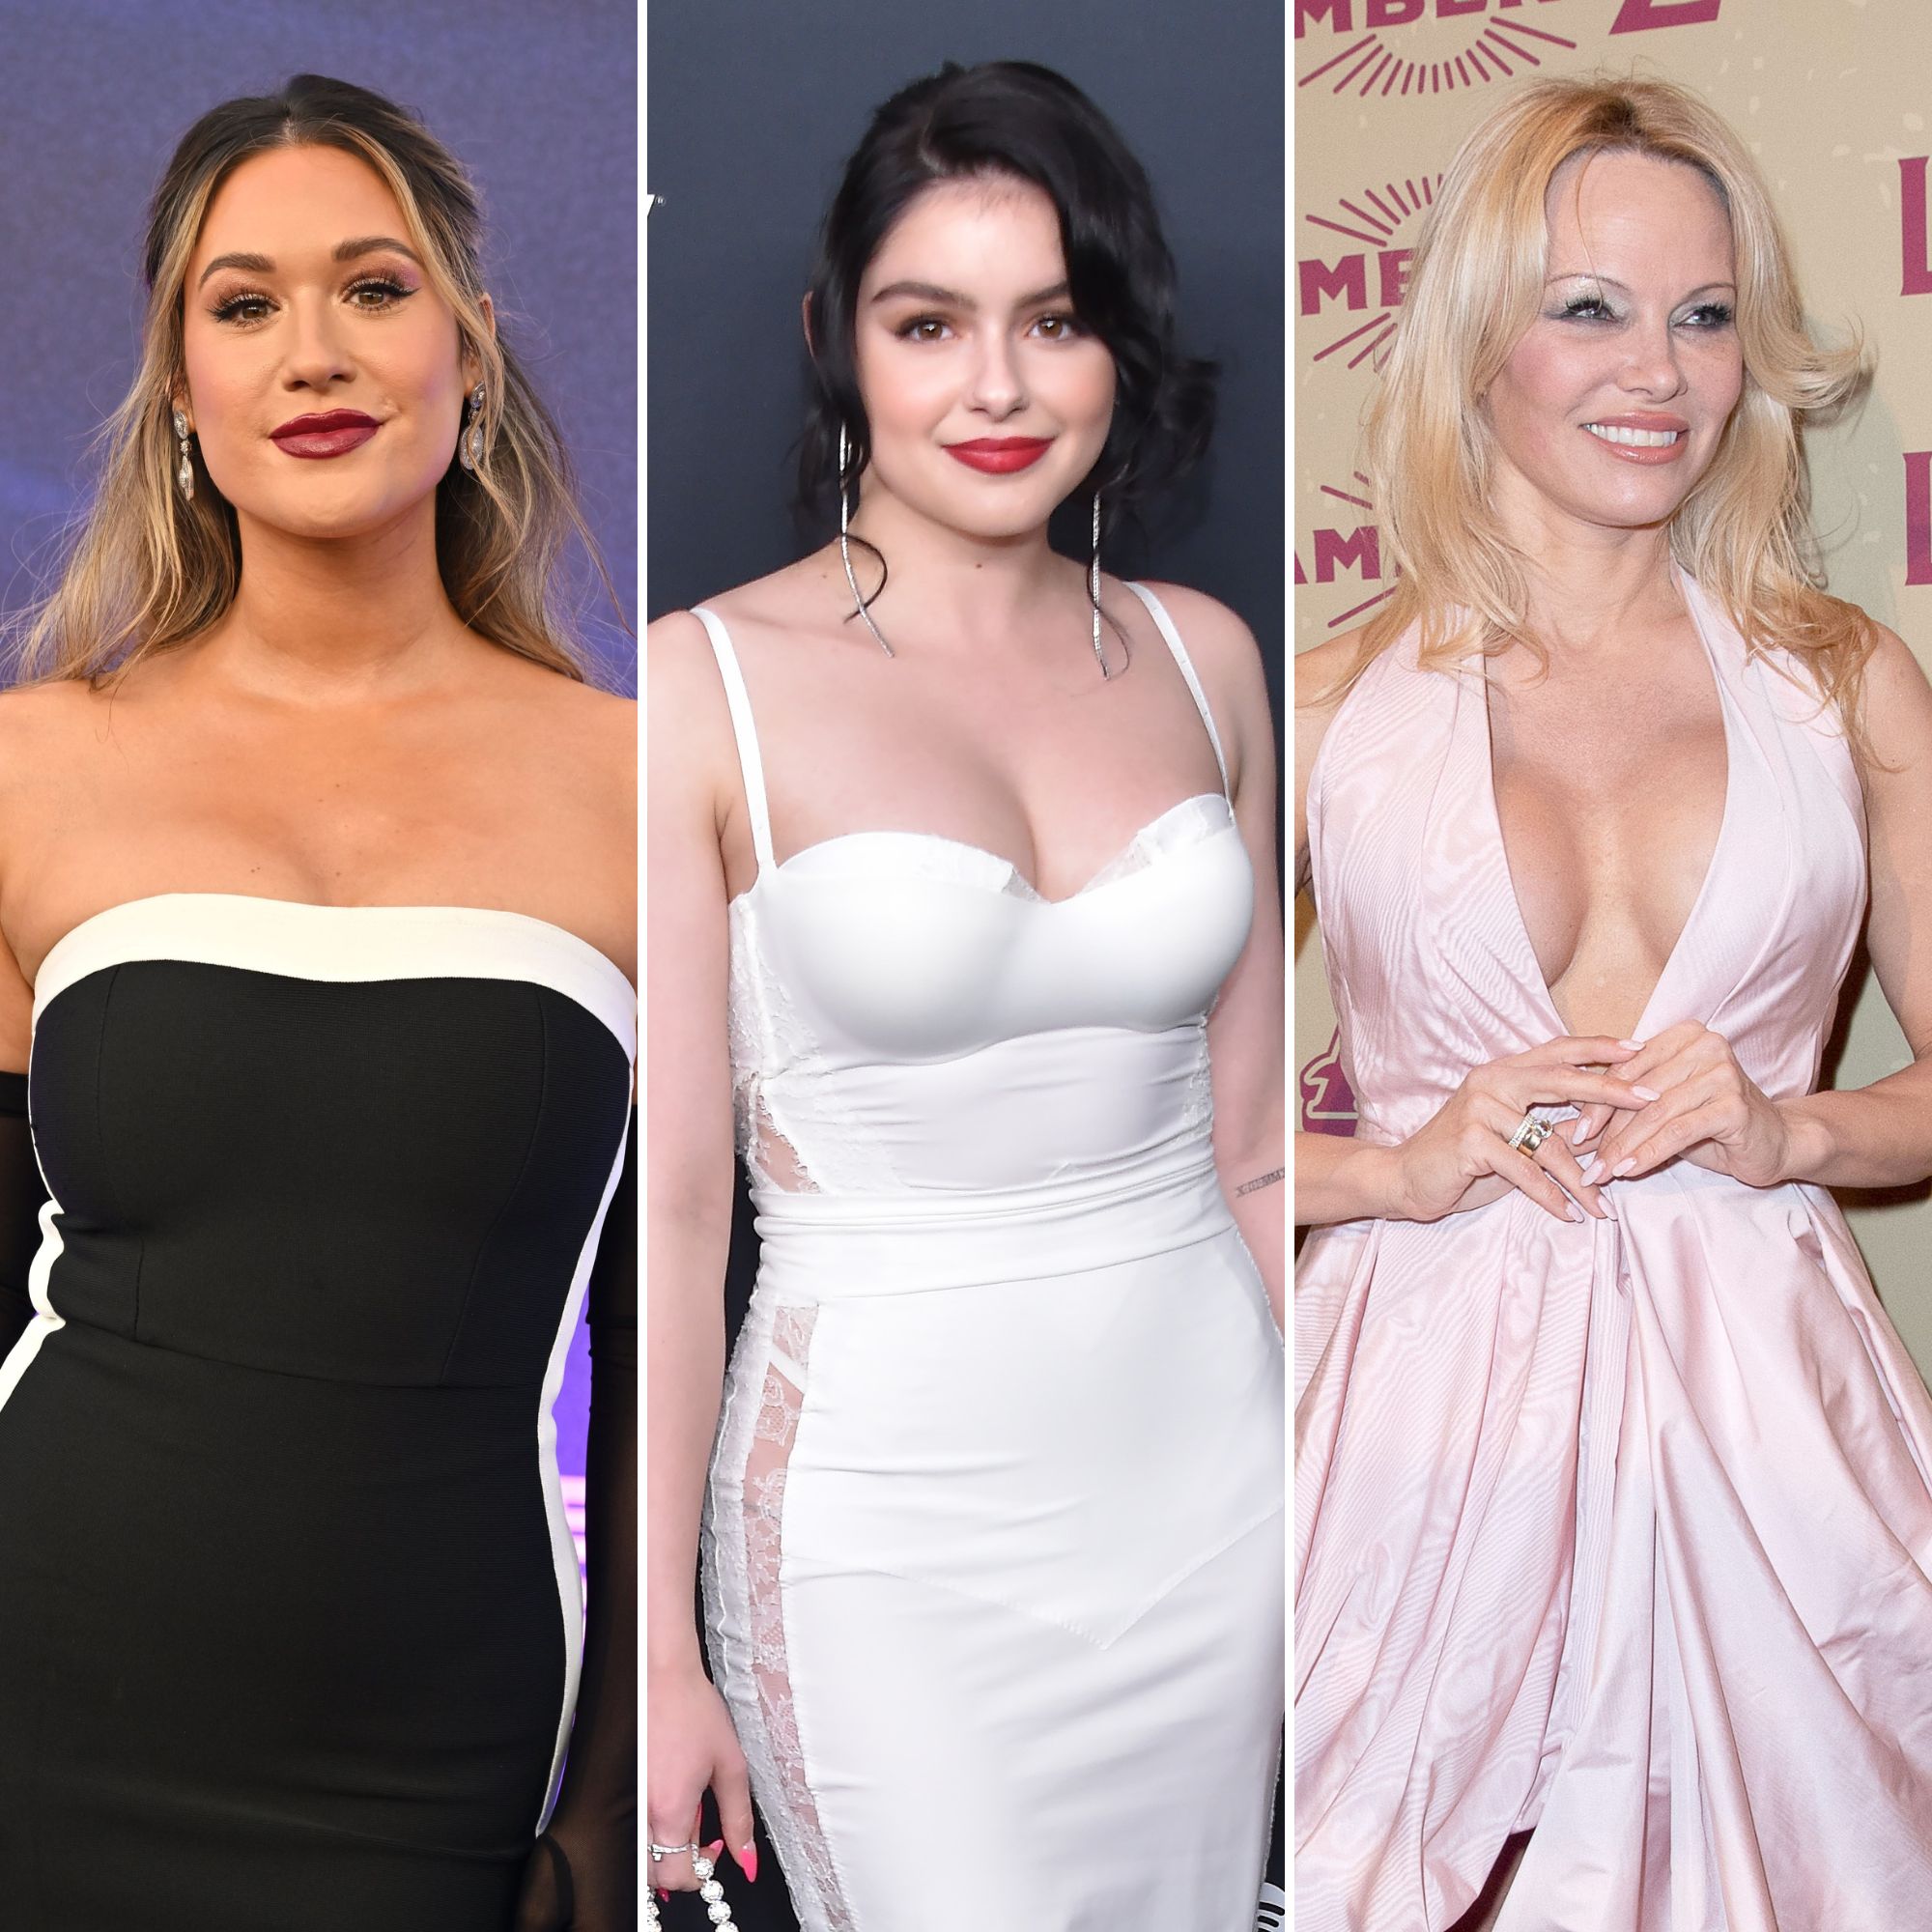 Celebs Who Had Breast Reductions: Pam Anderson, Ariel Winter